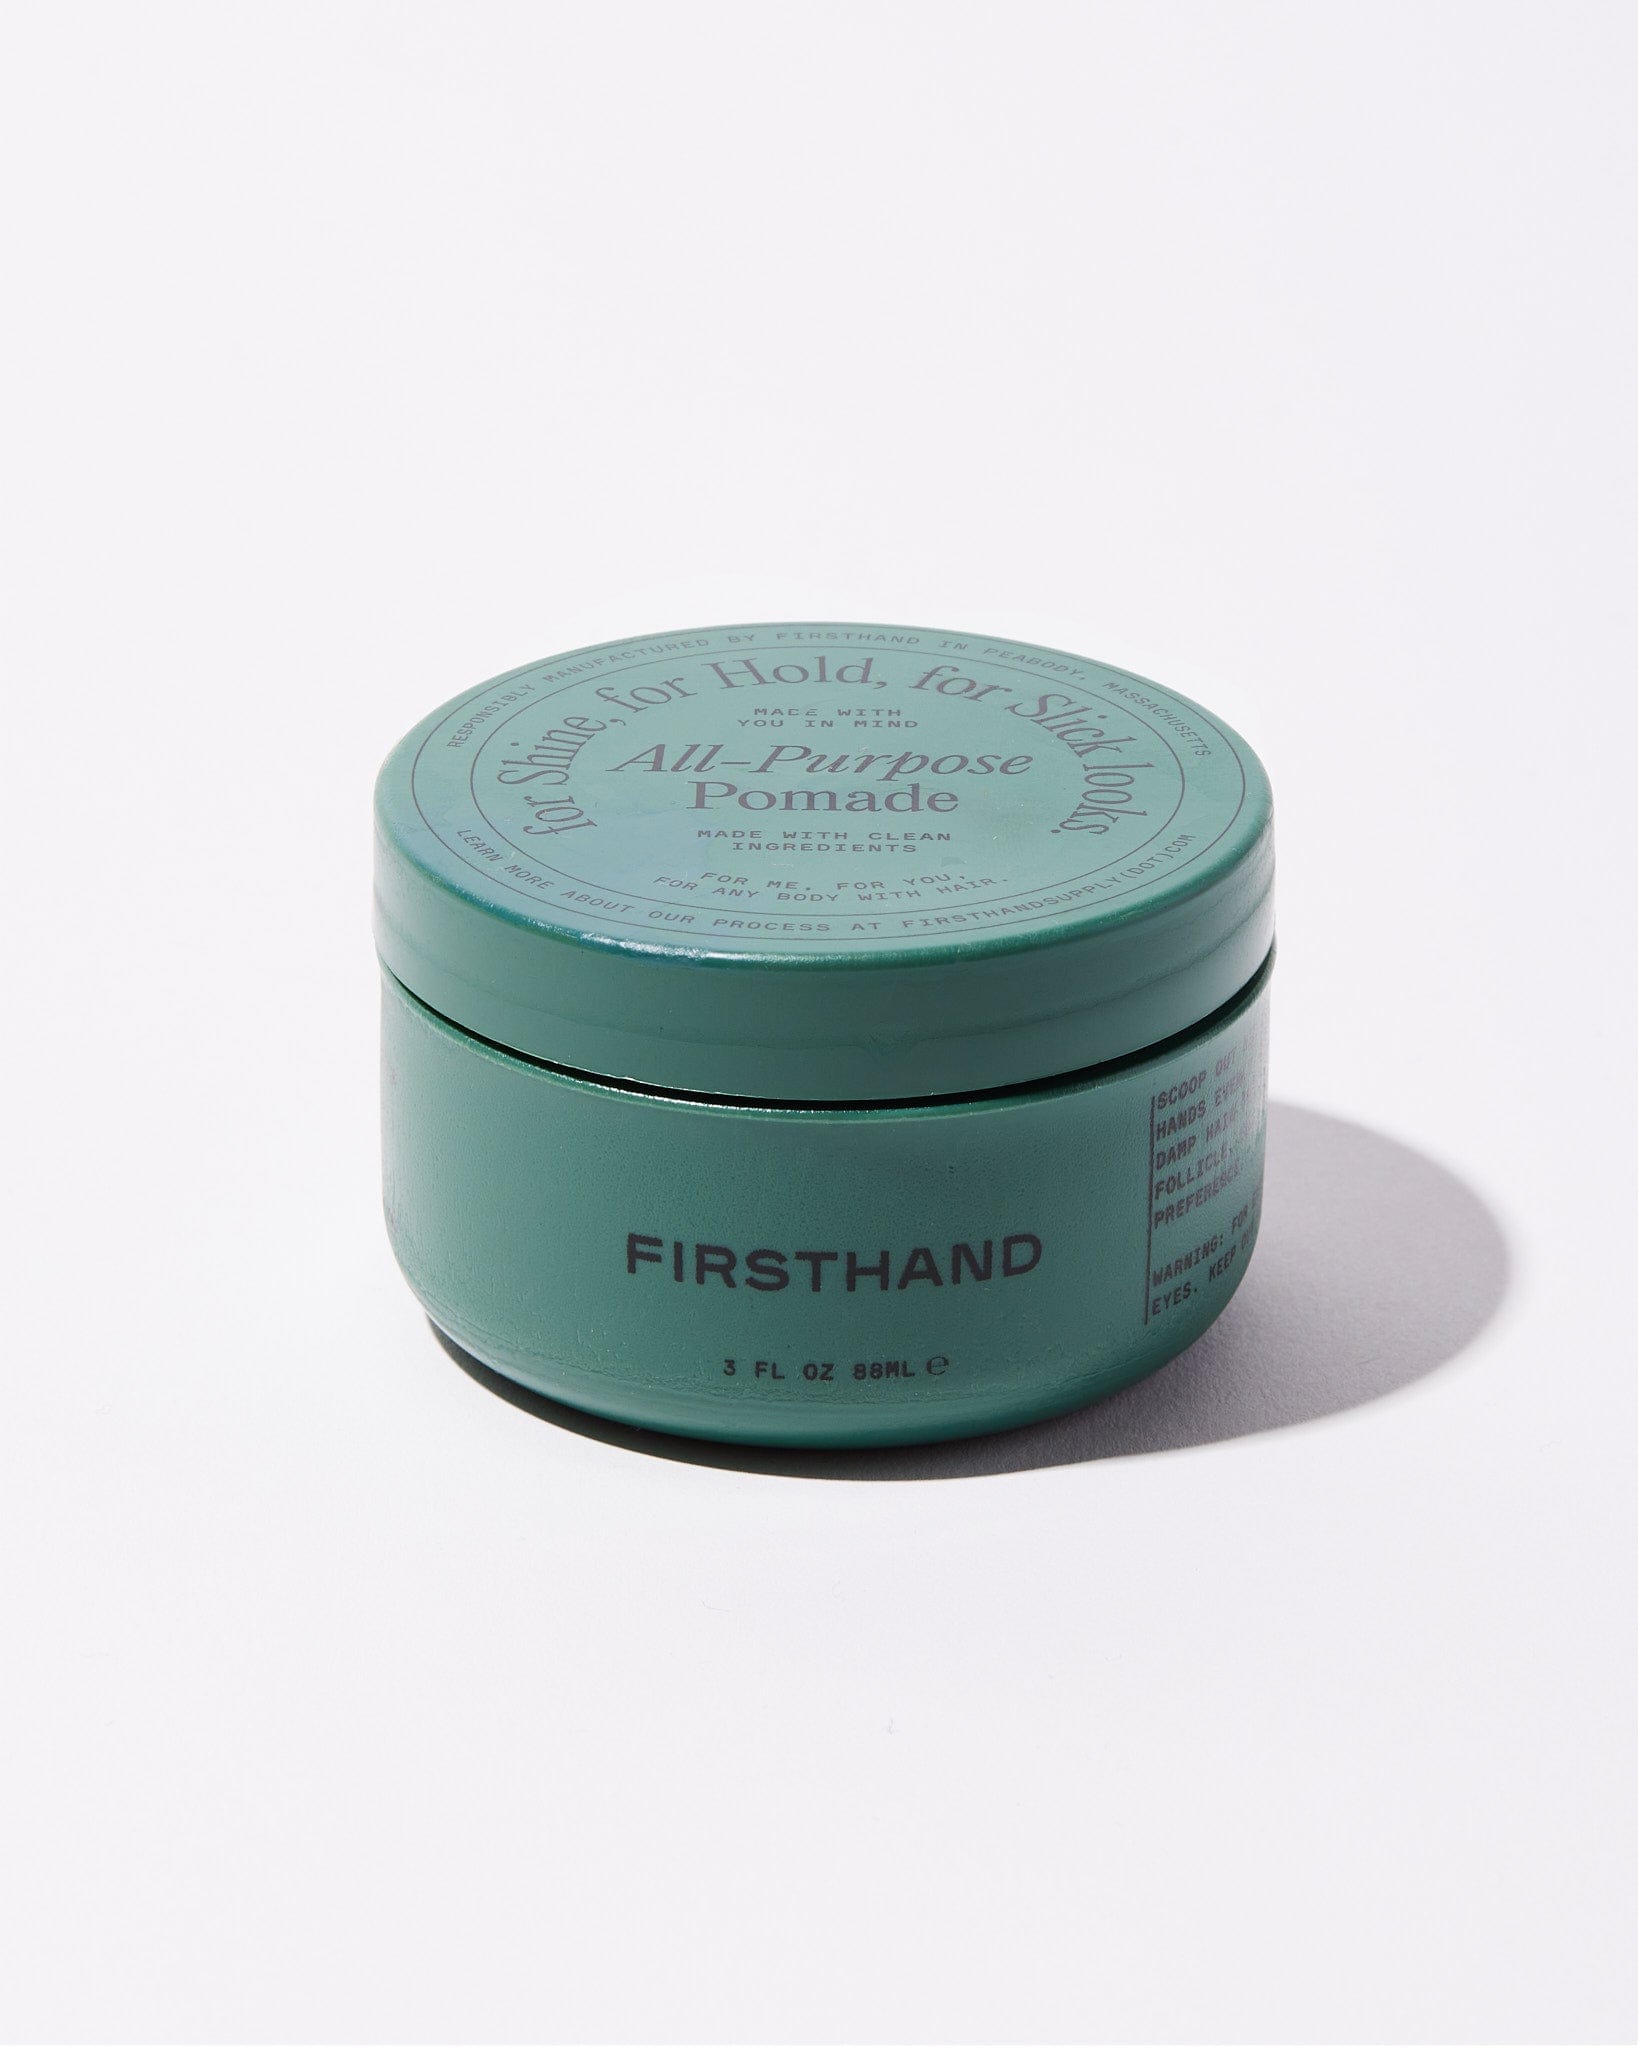 Supply - Firsthand All-Purpose Pomade